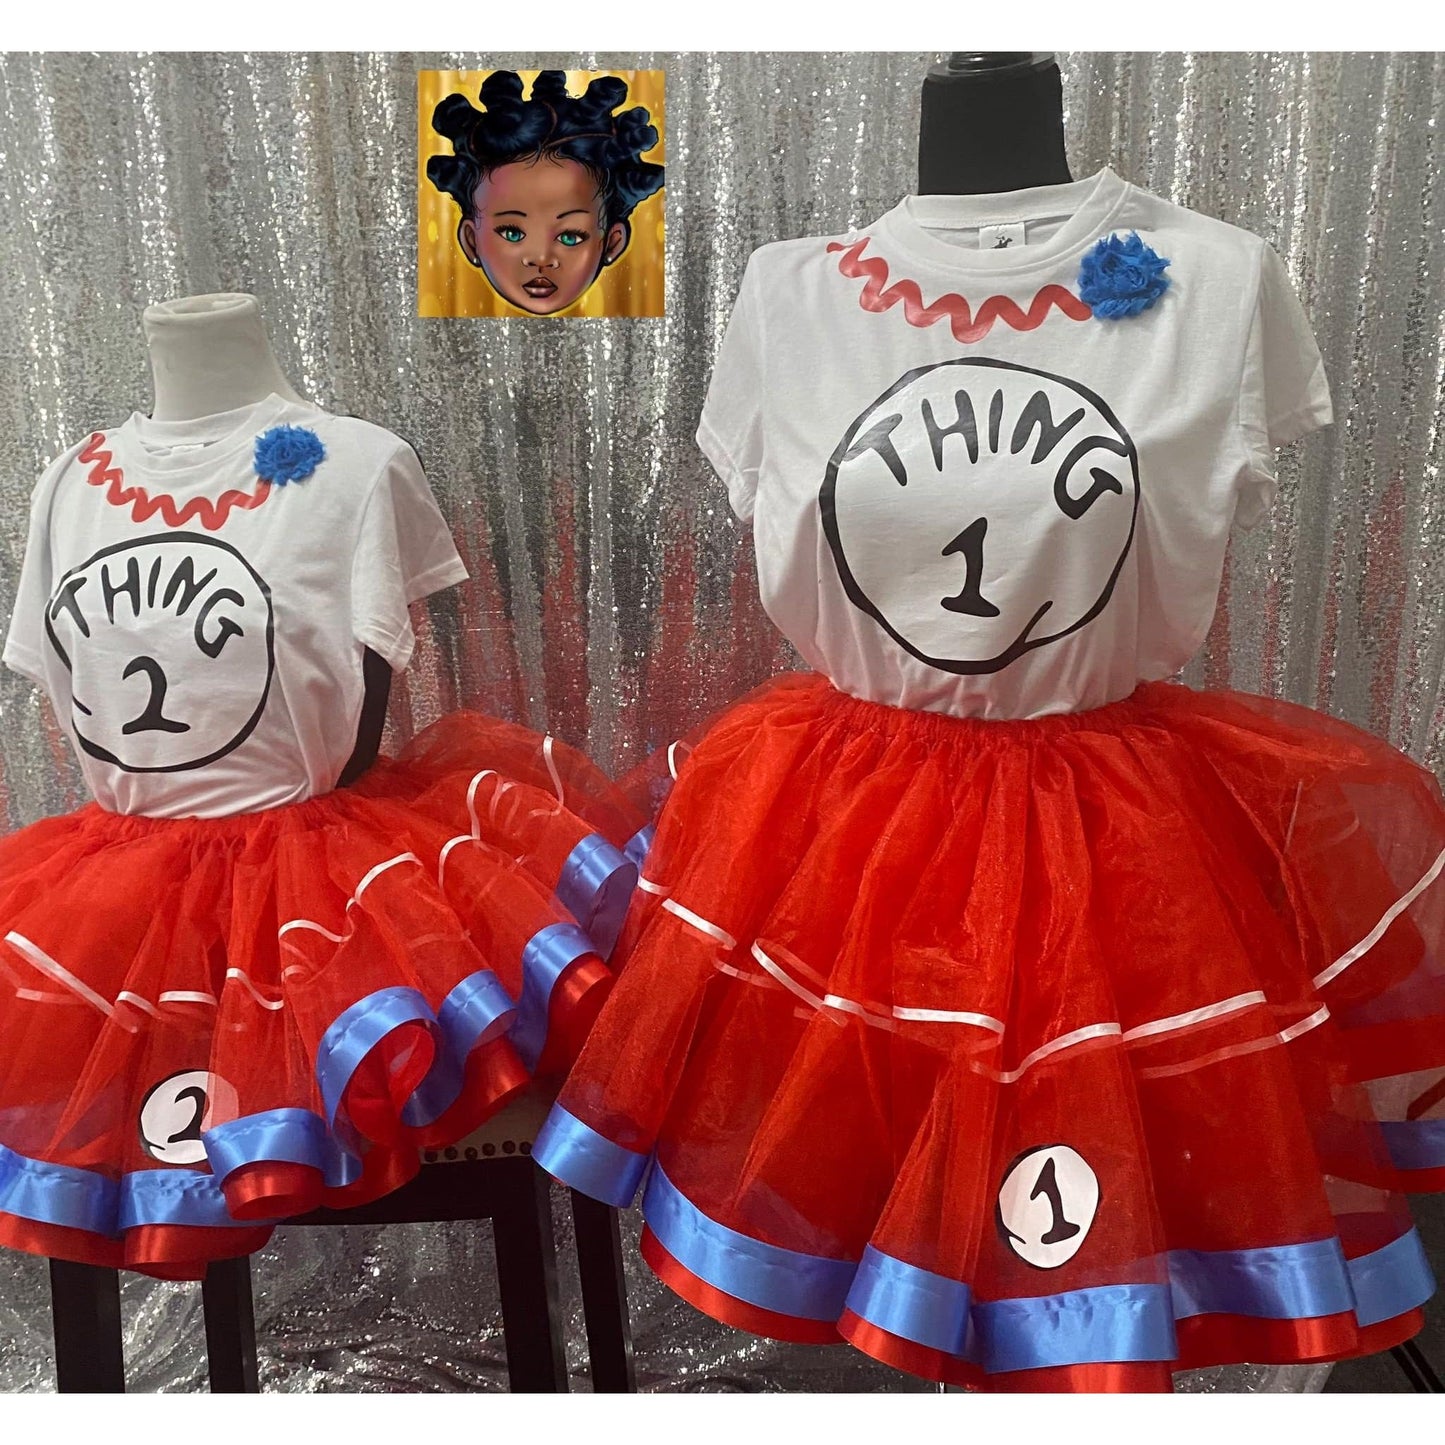 Thing 1-Thing 2 Tutu Outfit (1997)